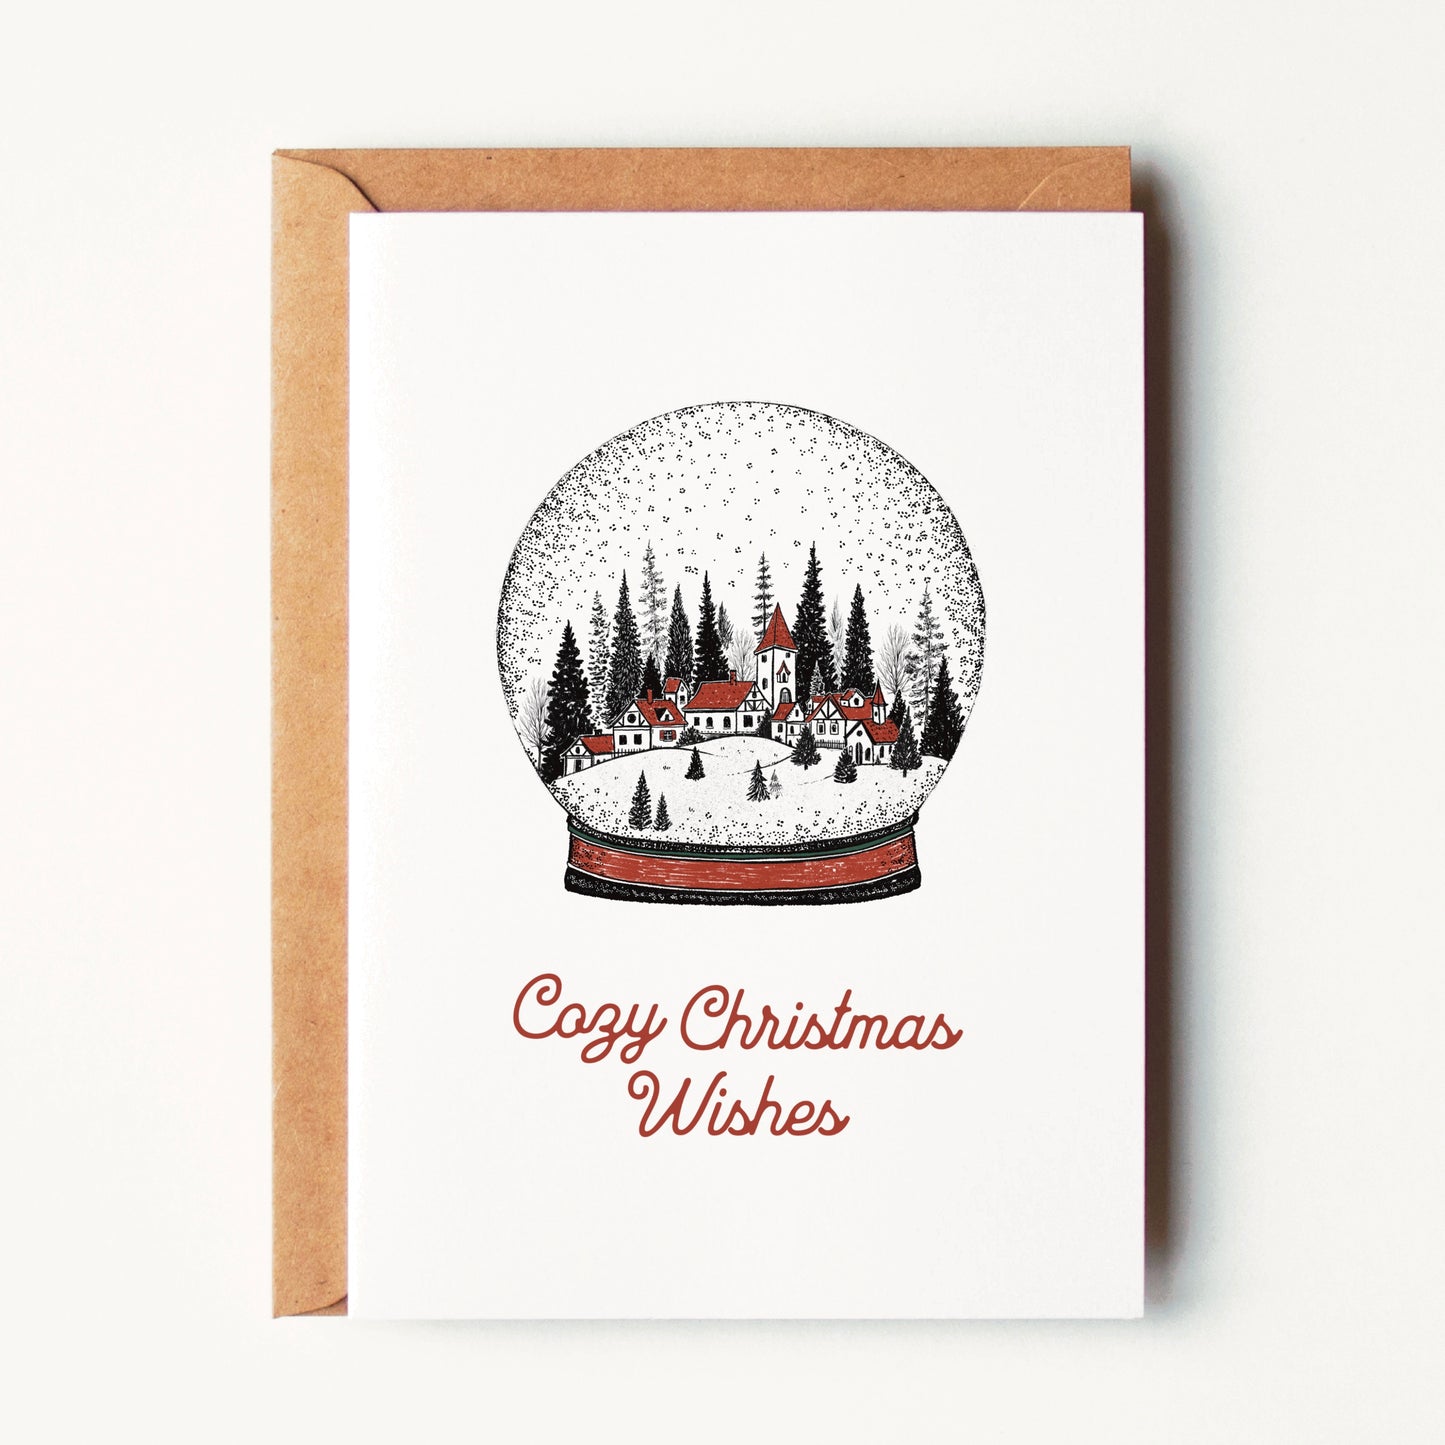 Cozy Christmas Wishes Greeting Card